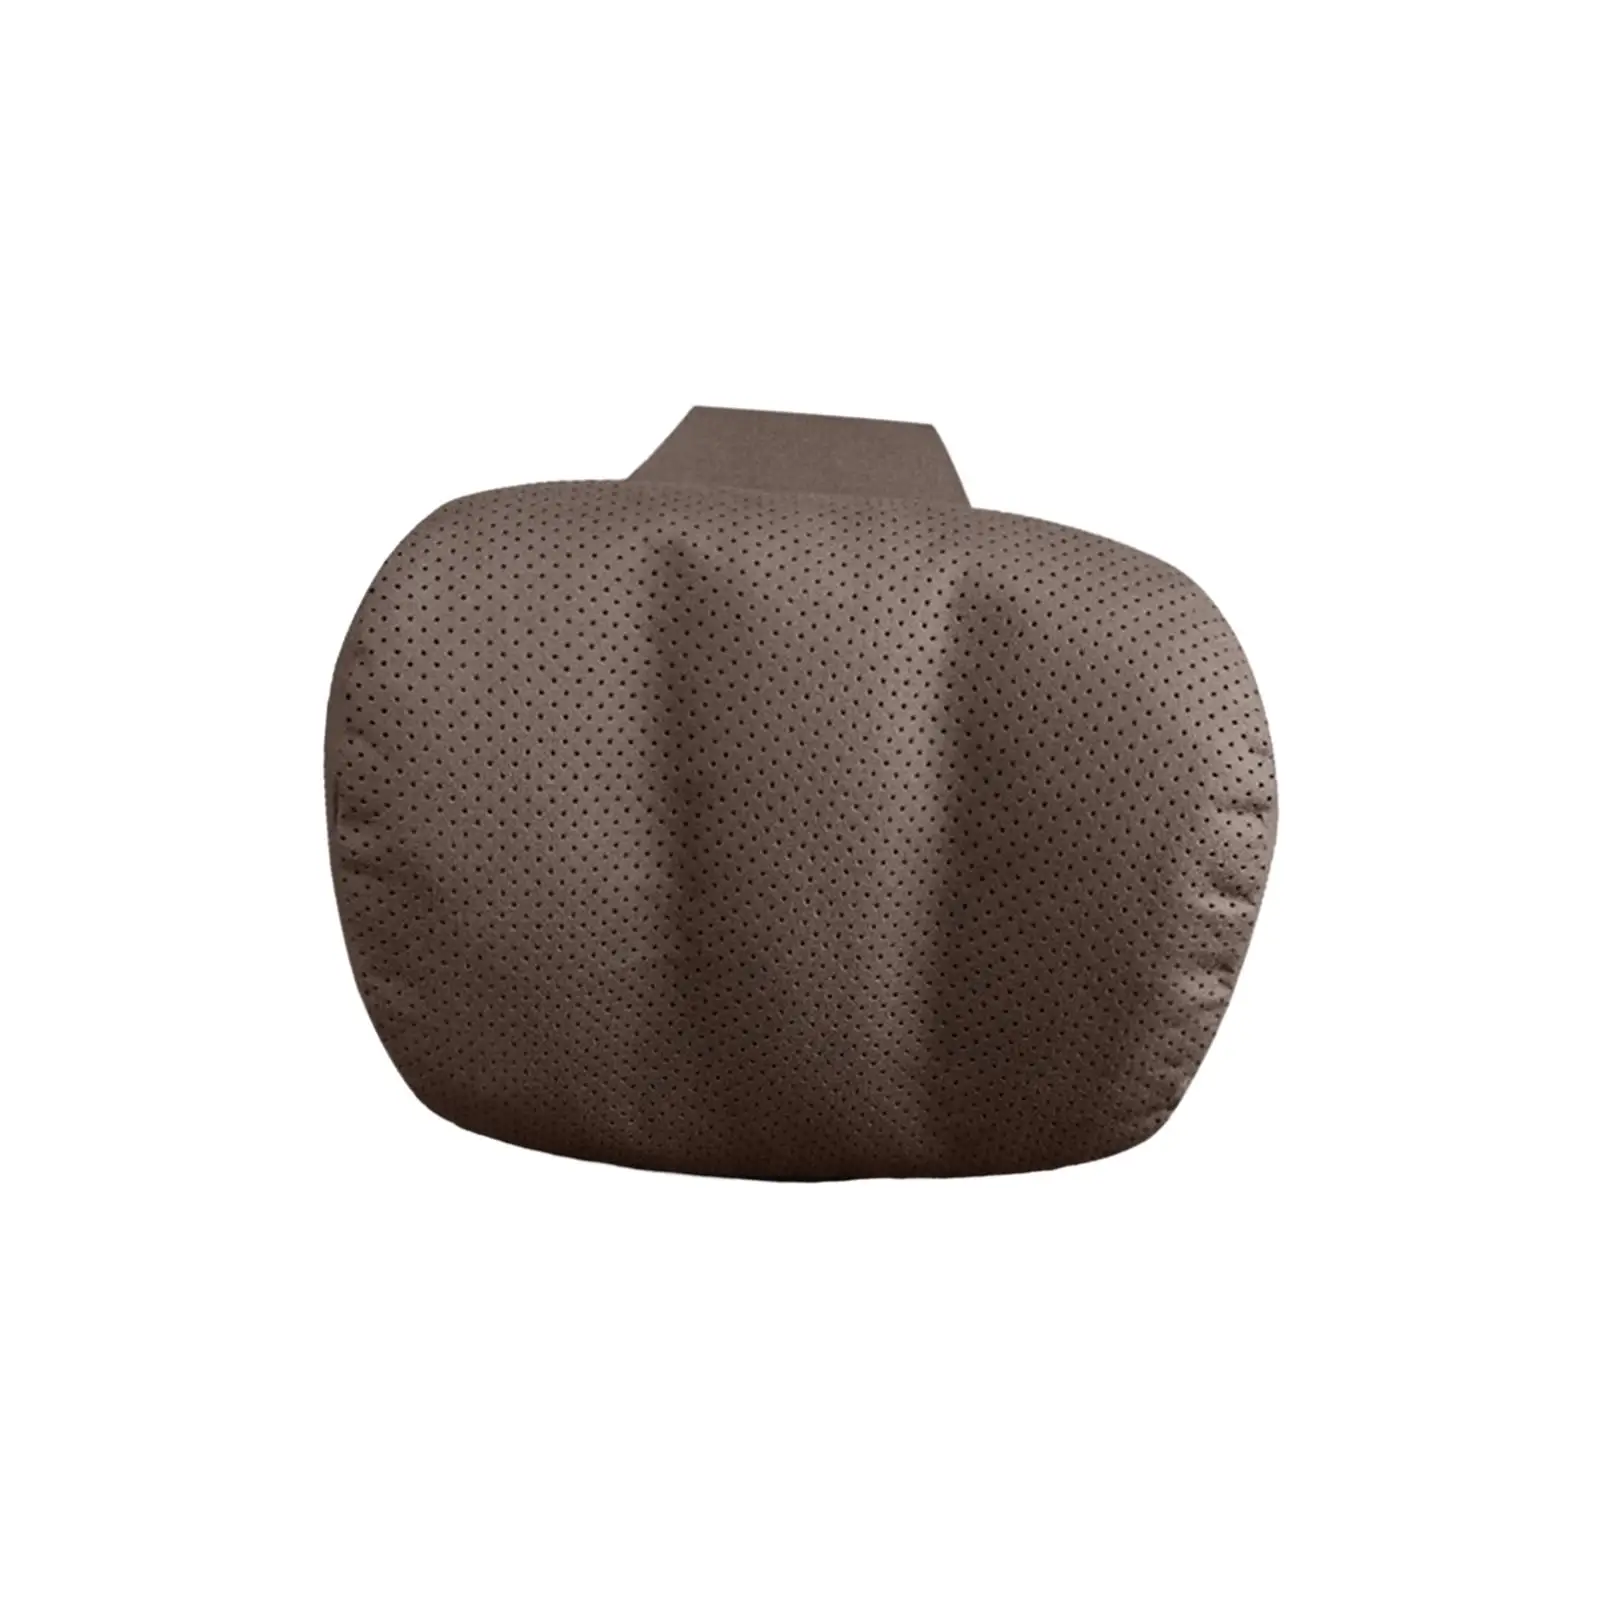 Head Rest Pillows Breathable Comfortable Universal Automotive Neck Support Car Headrest Pillow for Driving Seat Home Office